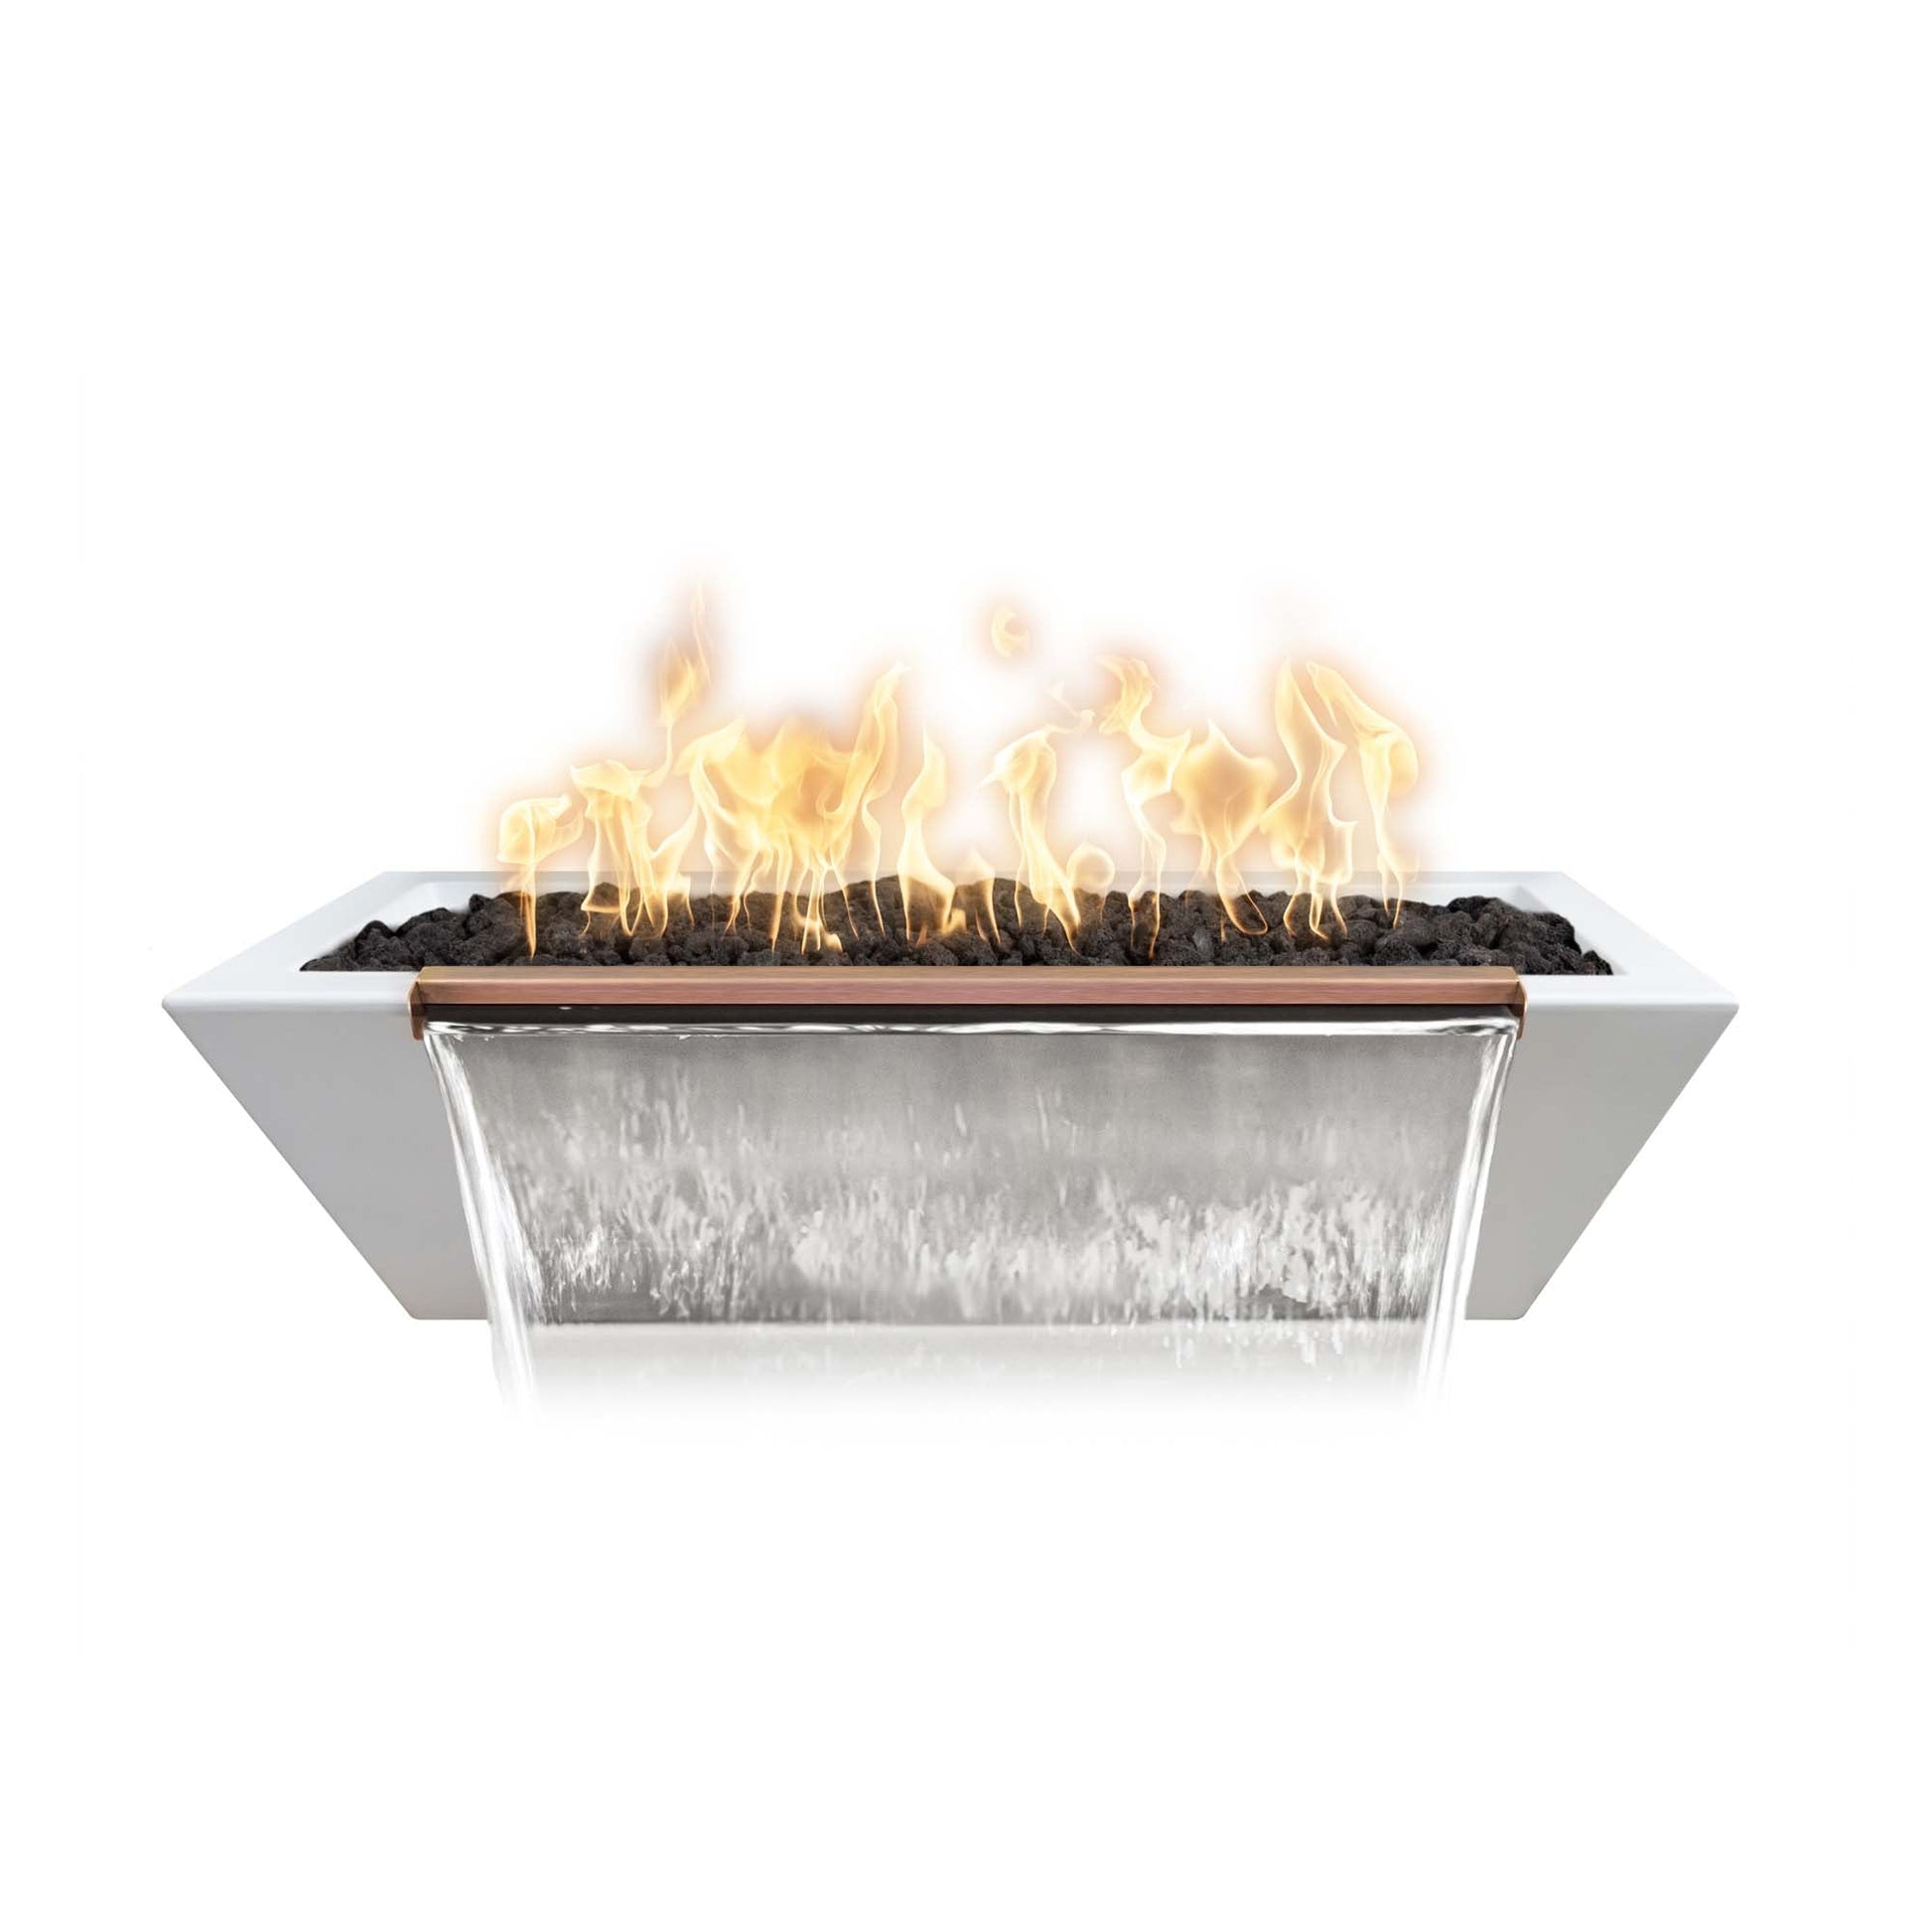 The Outdoor Plus Linear Maya 72" Natural Gray GFRC Concrete Natural Gas Fire & Water Bowl with 12V Electronic Ignition